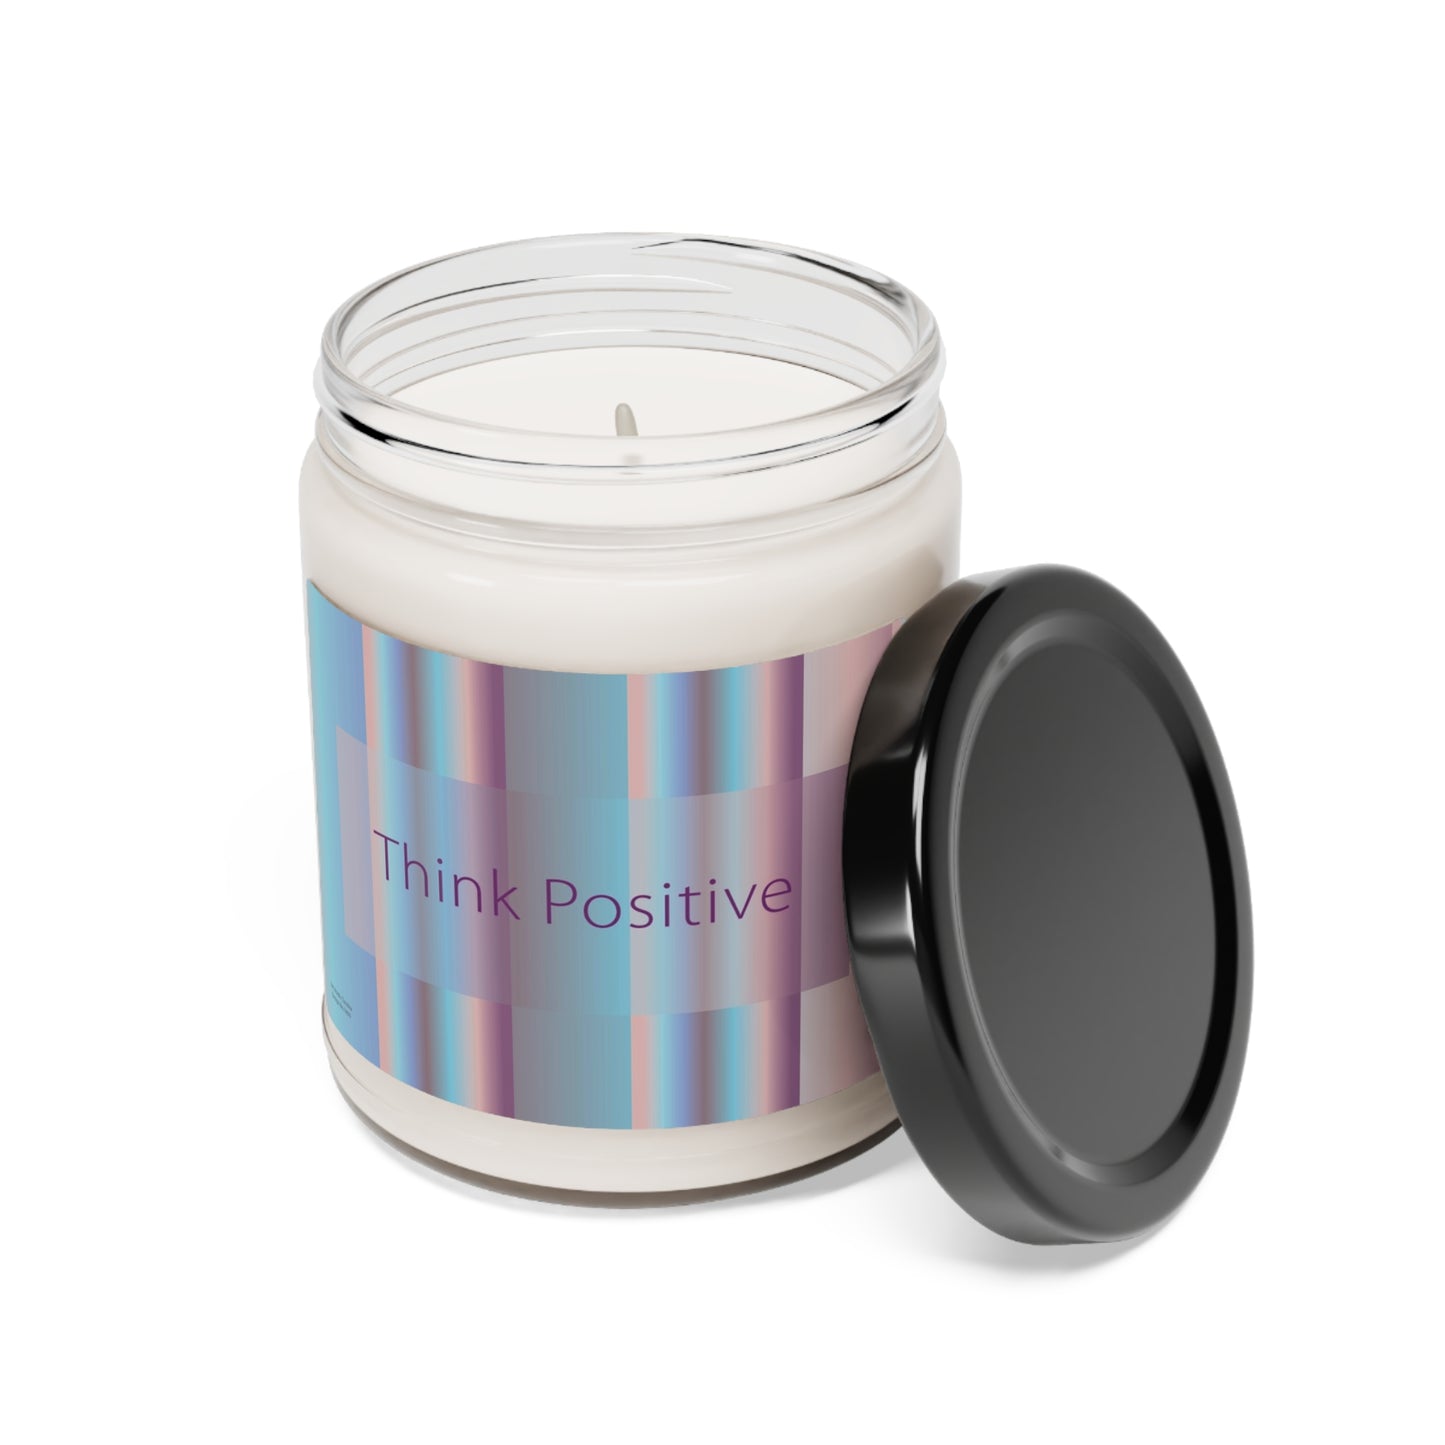 Scented Soy Candle, 9oz Think Positive - Design No.1800